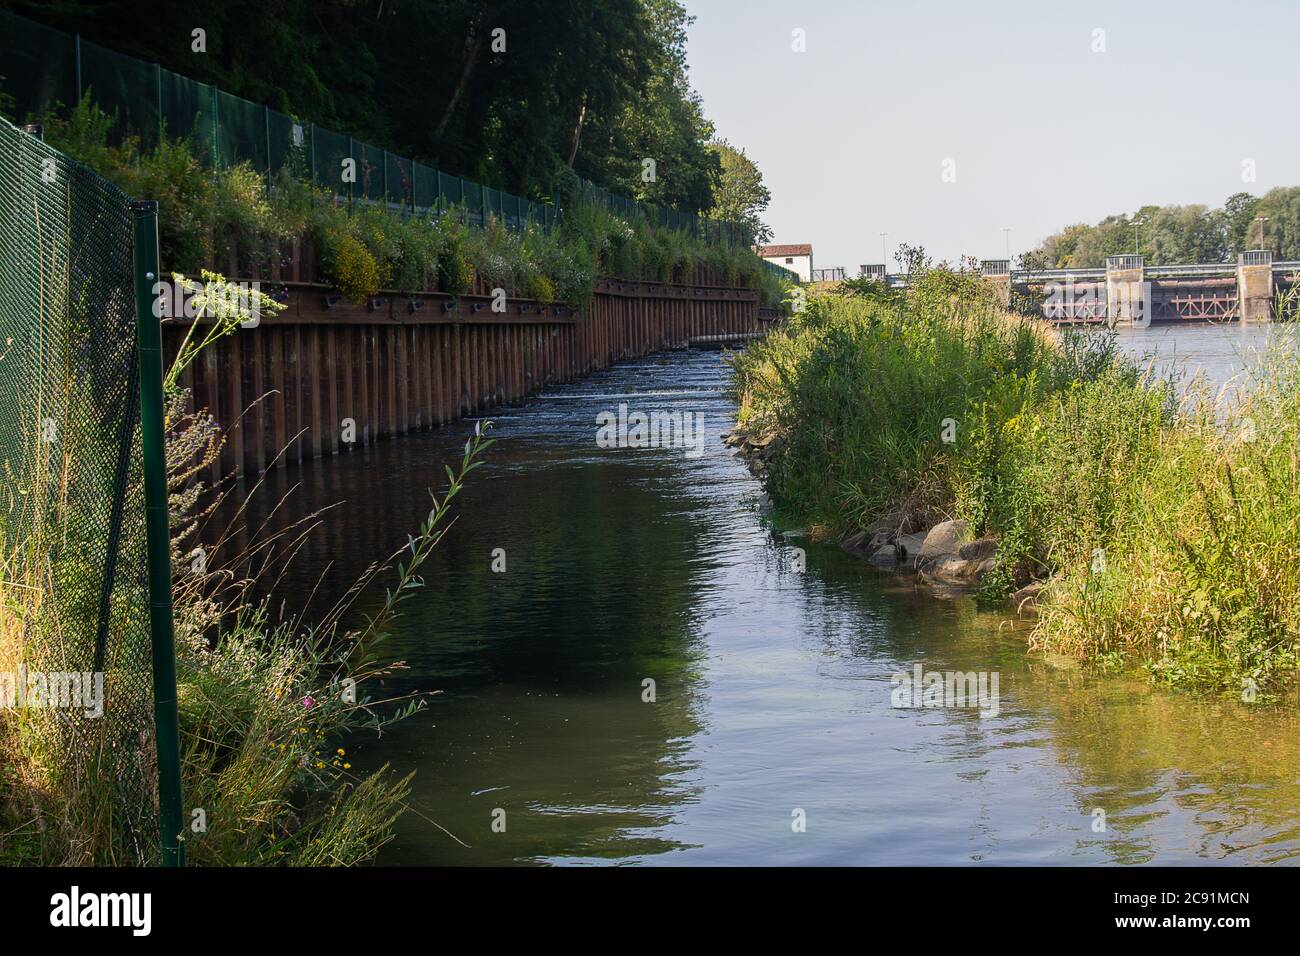 Here a fish ladder aid next to a hydroelectric power station. This allows fish to migrate upstream. Stock Photo